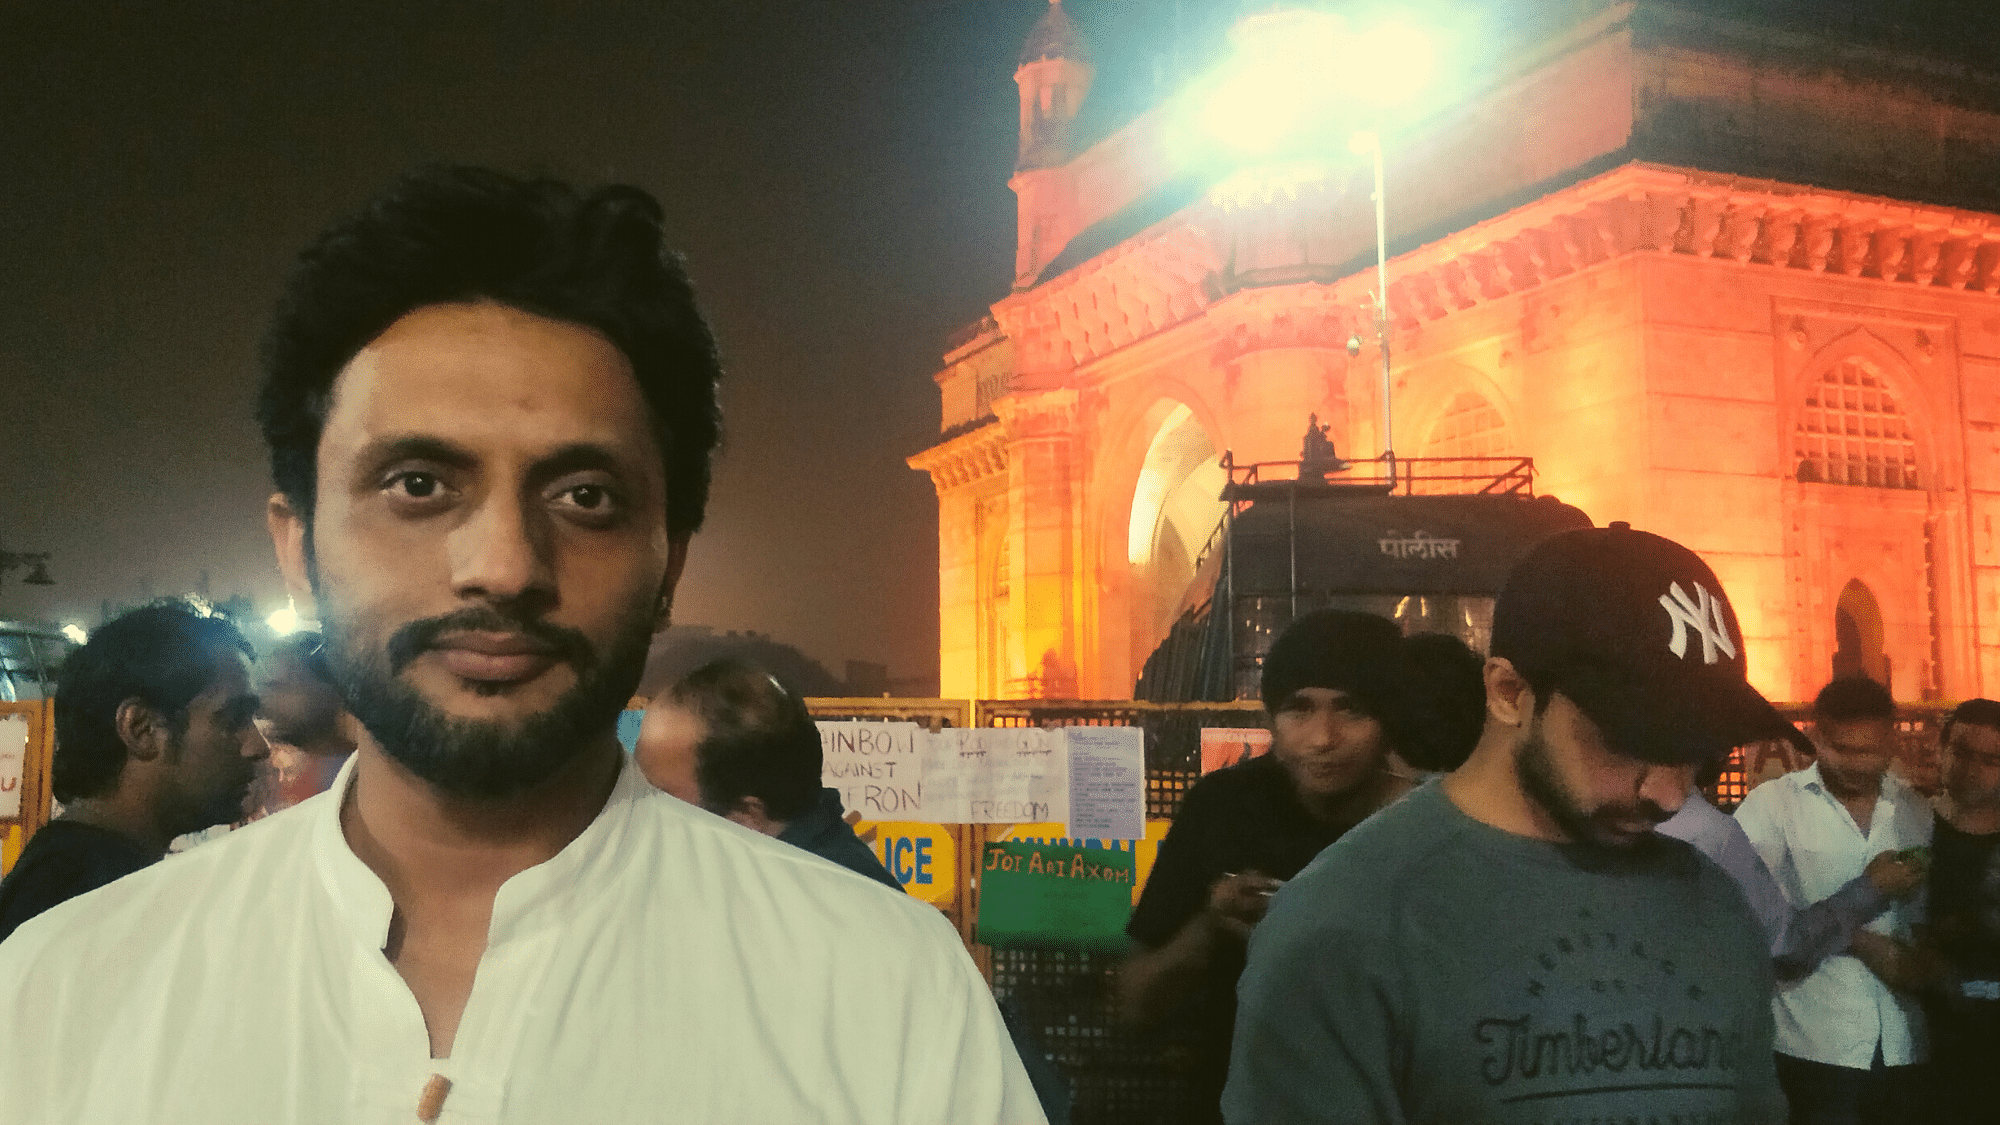 Actor Zeeshan Ayyub says that BJP is cracking down on peaceful protesters while encouraging violent elements such as those who assaulted students in JNU.